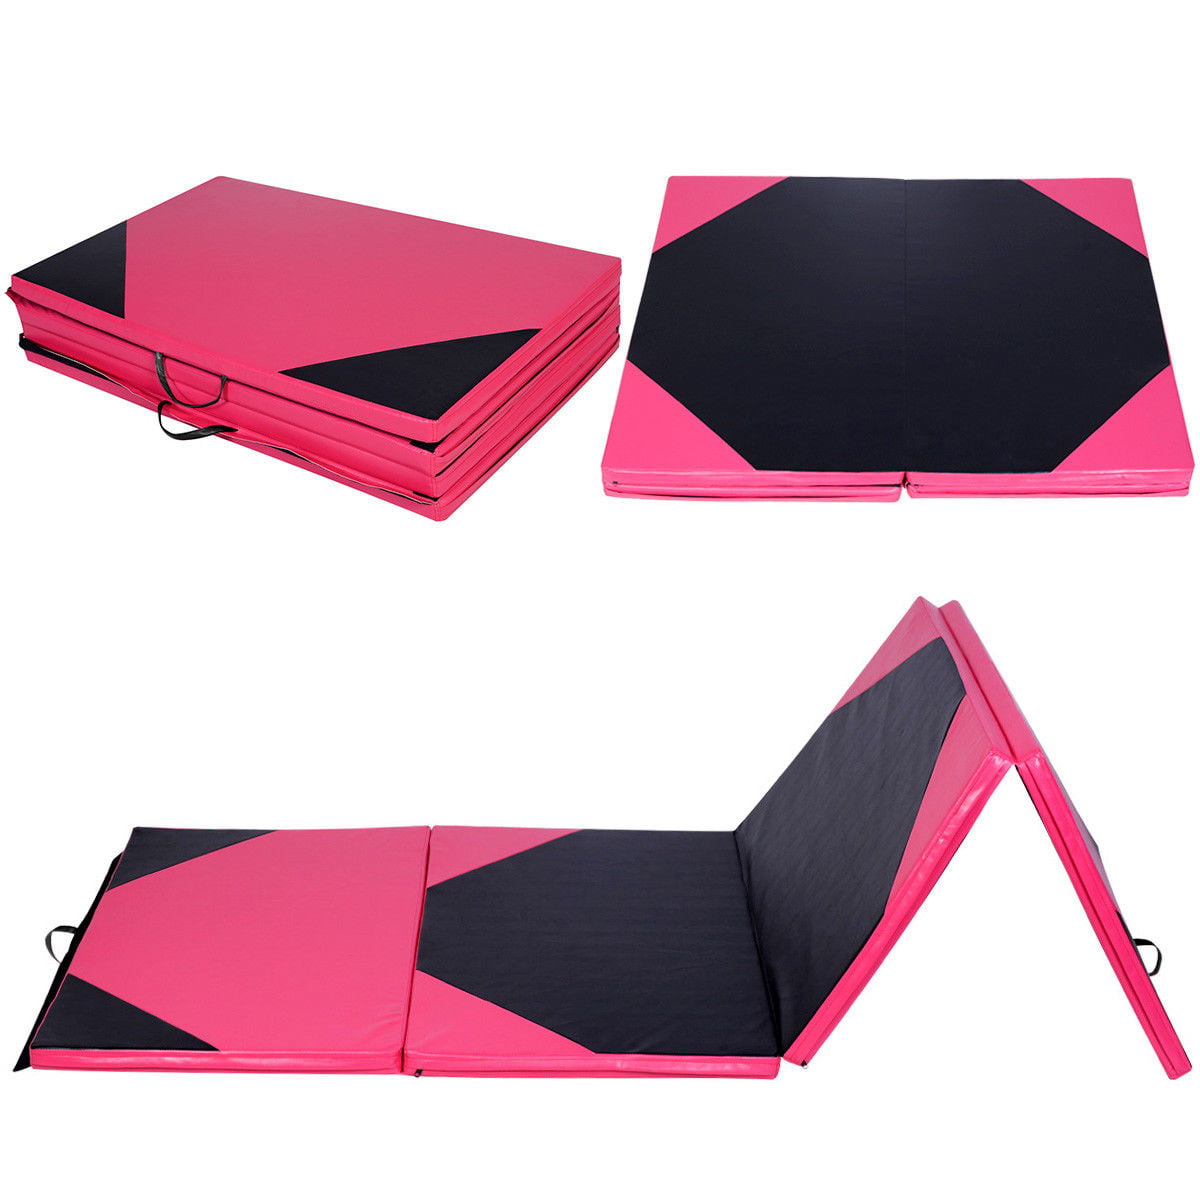 COSTWAY 4X10X2 Gymnastics Mat Folding Panel Thick Gym Fitness Exercise Pink/Black New 